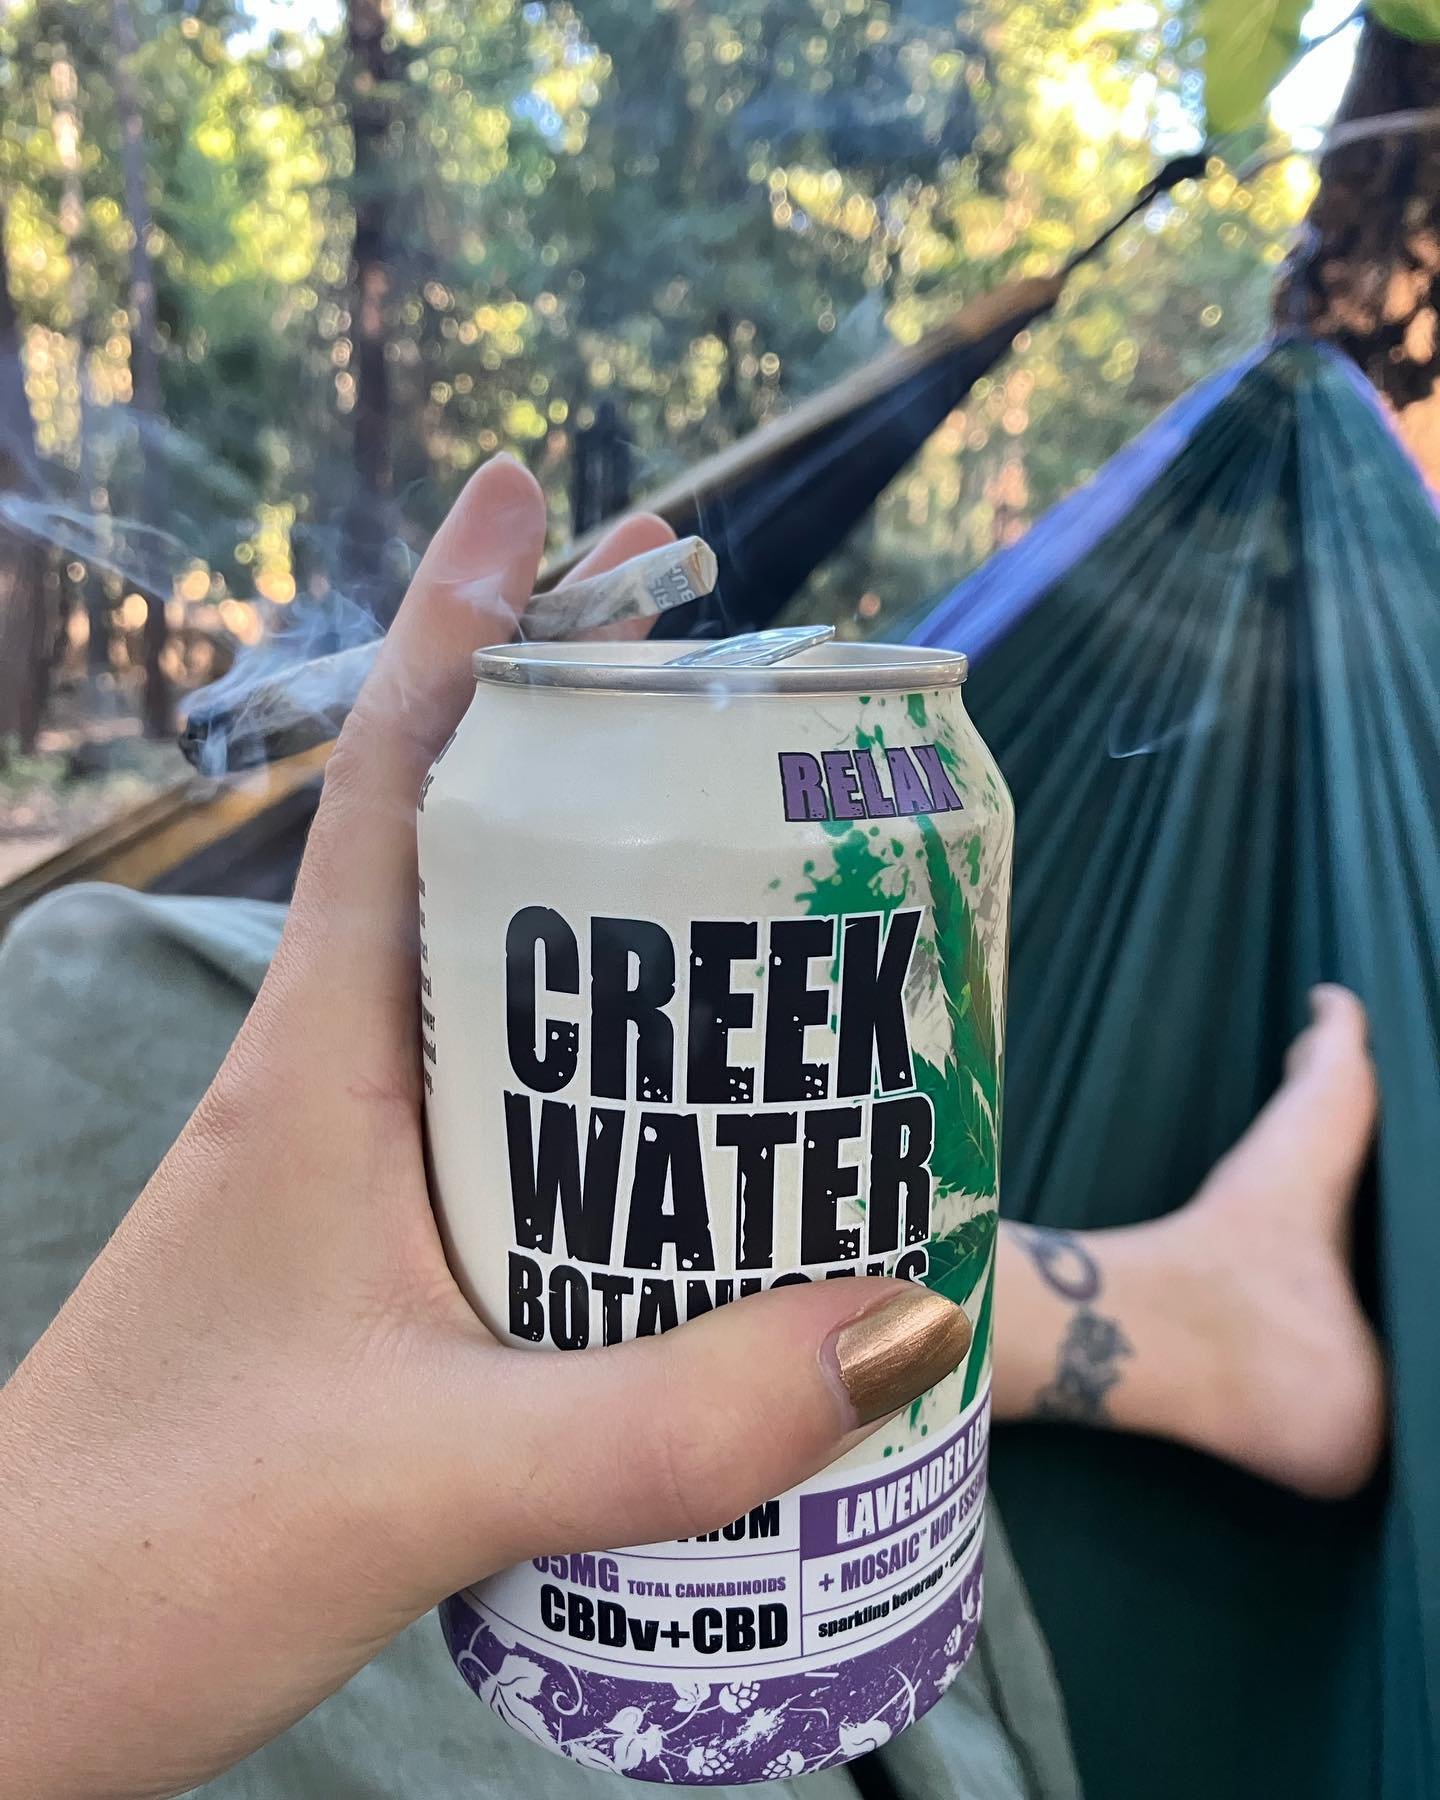 All these Monday vibes have us dreaming about lazy afternoon hangs in the hammocks 💜 ☀️ 

How do you like to unwind at the end of a long work day? 

Our choice? Cracking open a can of Relax CBDv, rolling up a fatty, and kicking our feet up hanging i